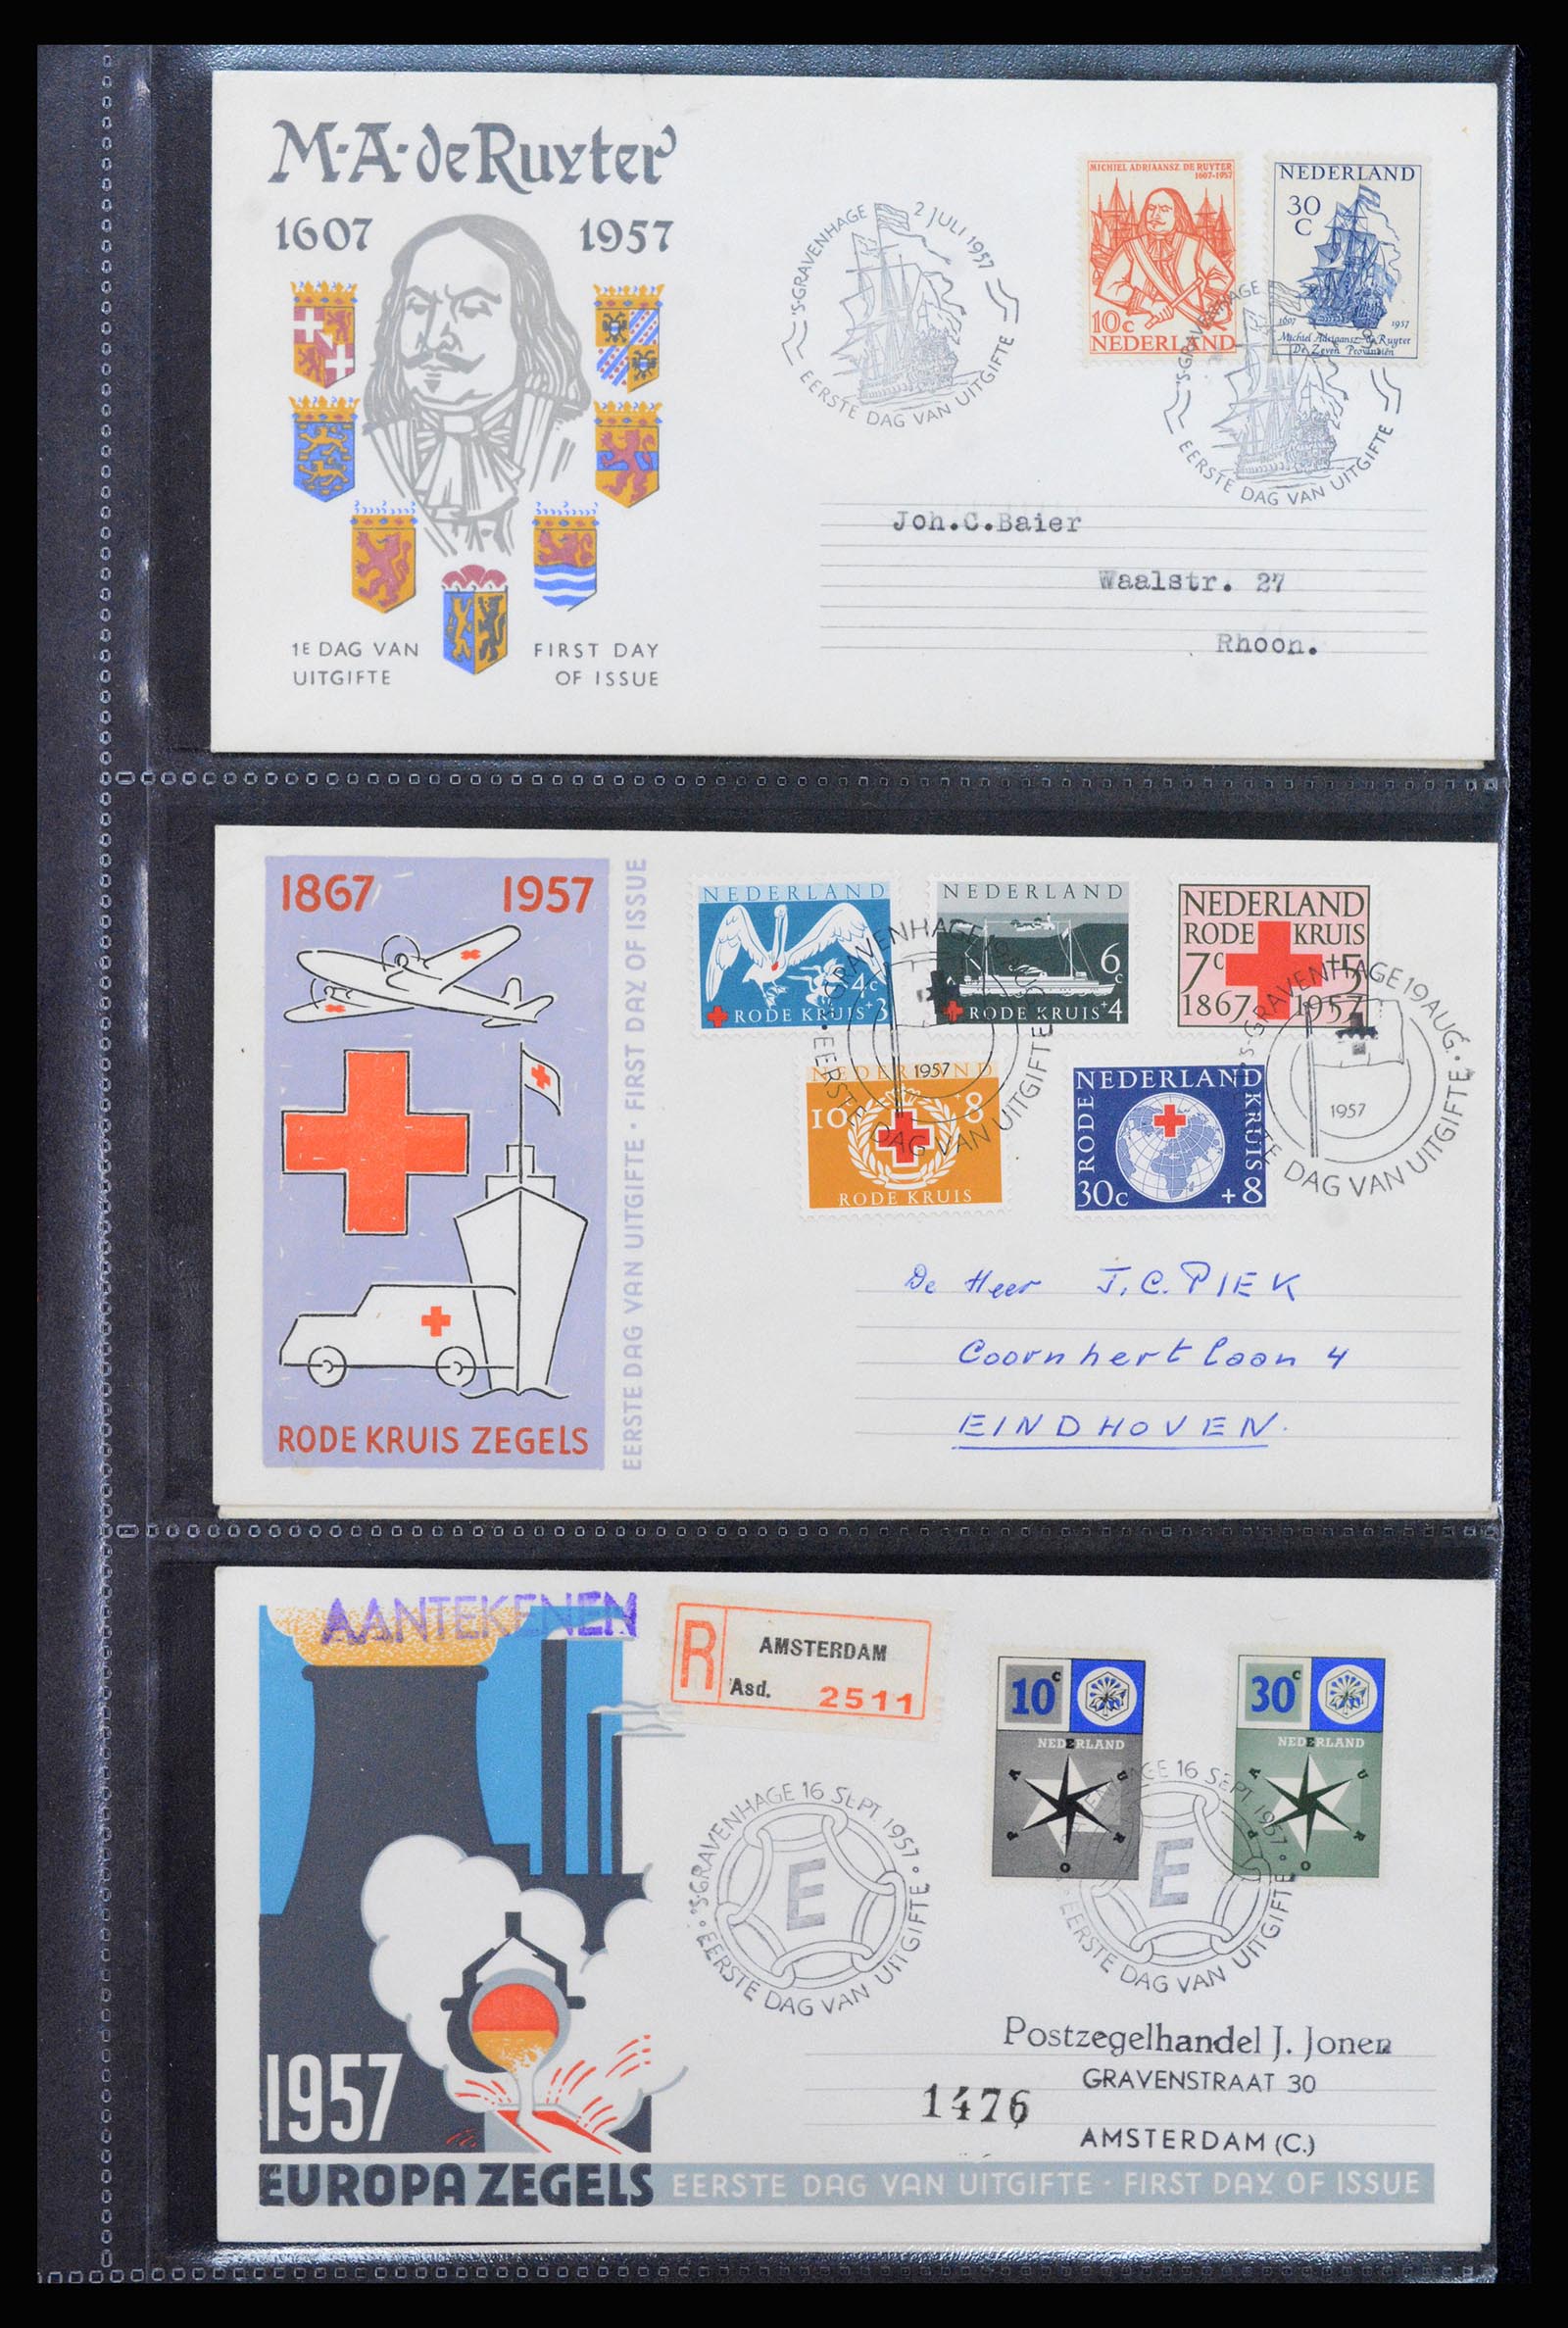 37264 011 - Stamp collection 37264 Netherlands FDC's 1950-1975.